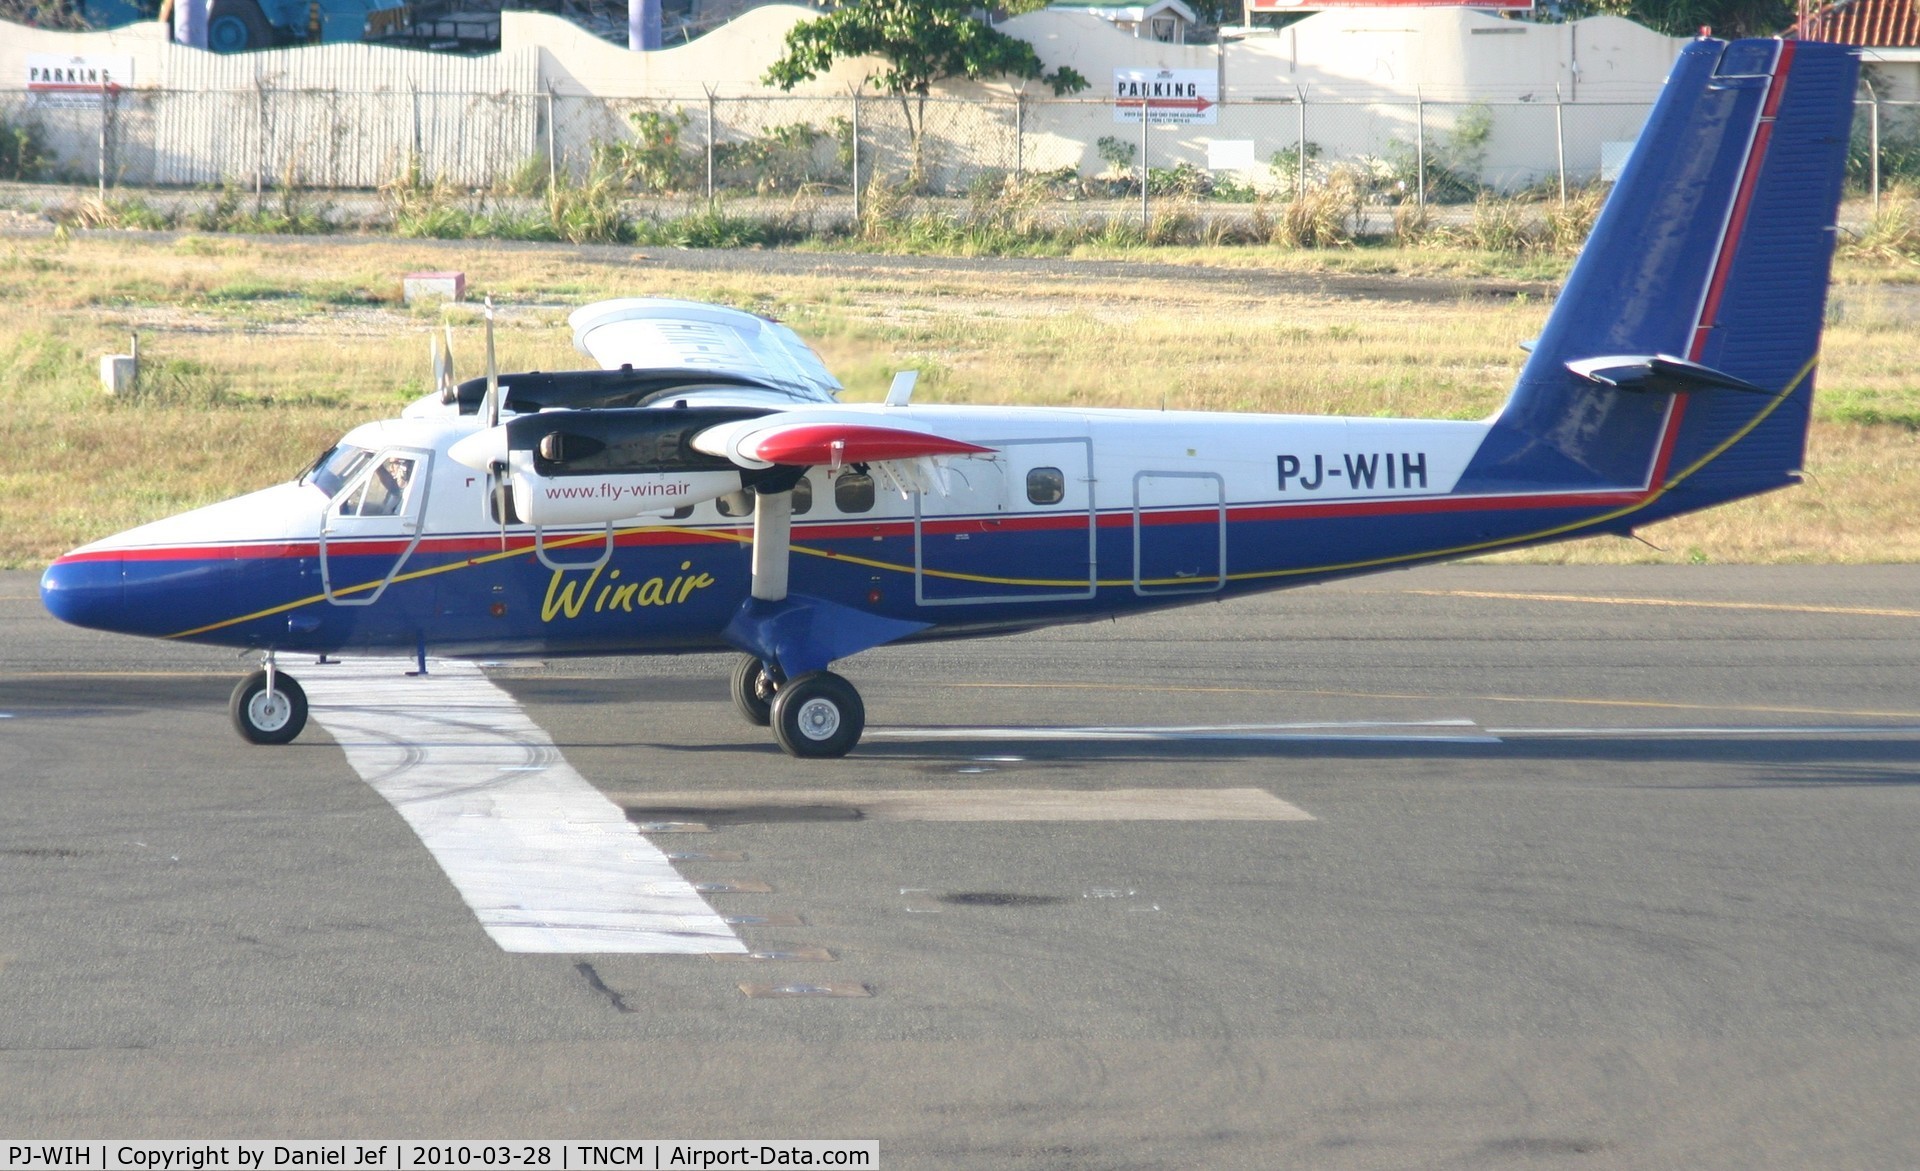 PJ-WIH, 1981 De Havilland Canada DHC-6-300 Twin Otter C/N 766, Winair PJ-WIH first at the lines for the day